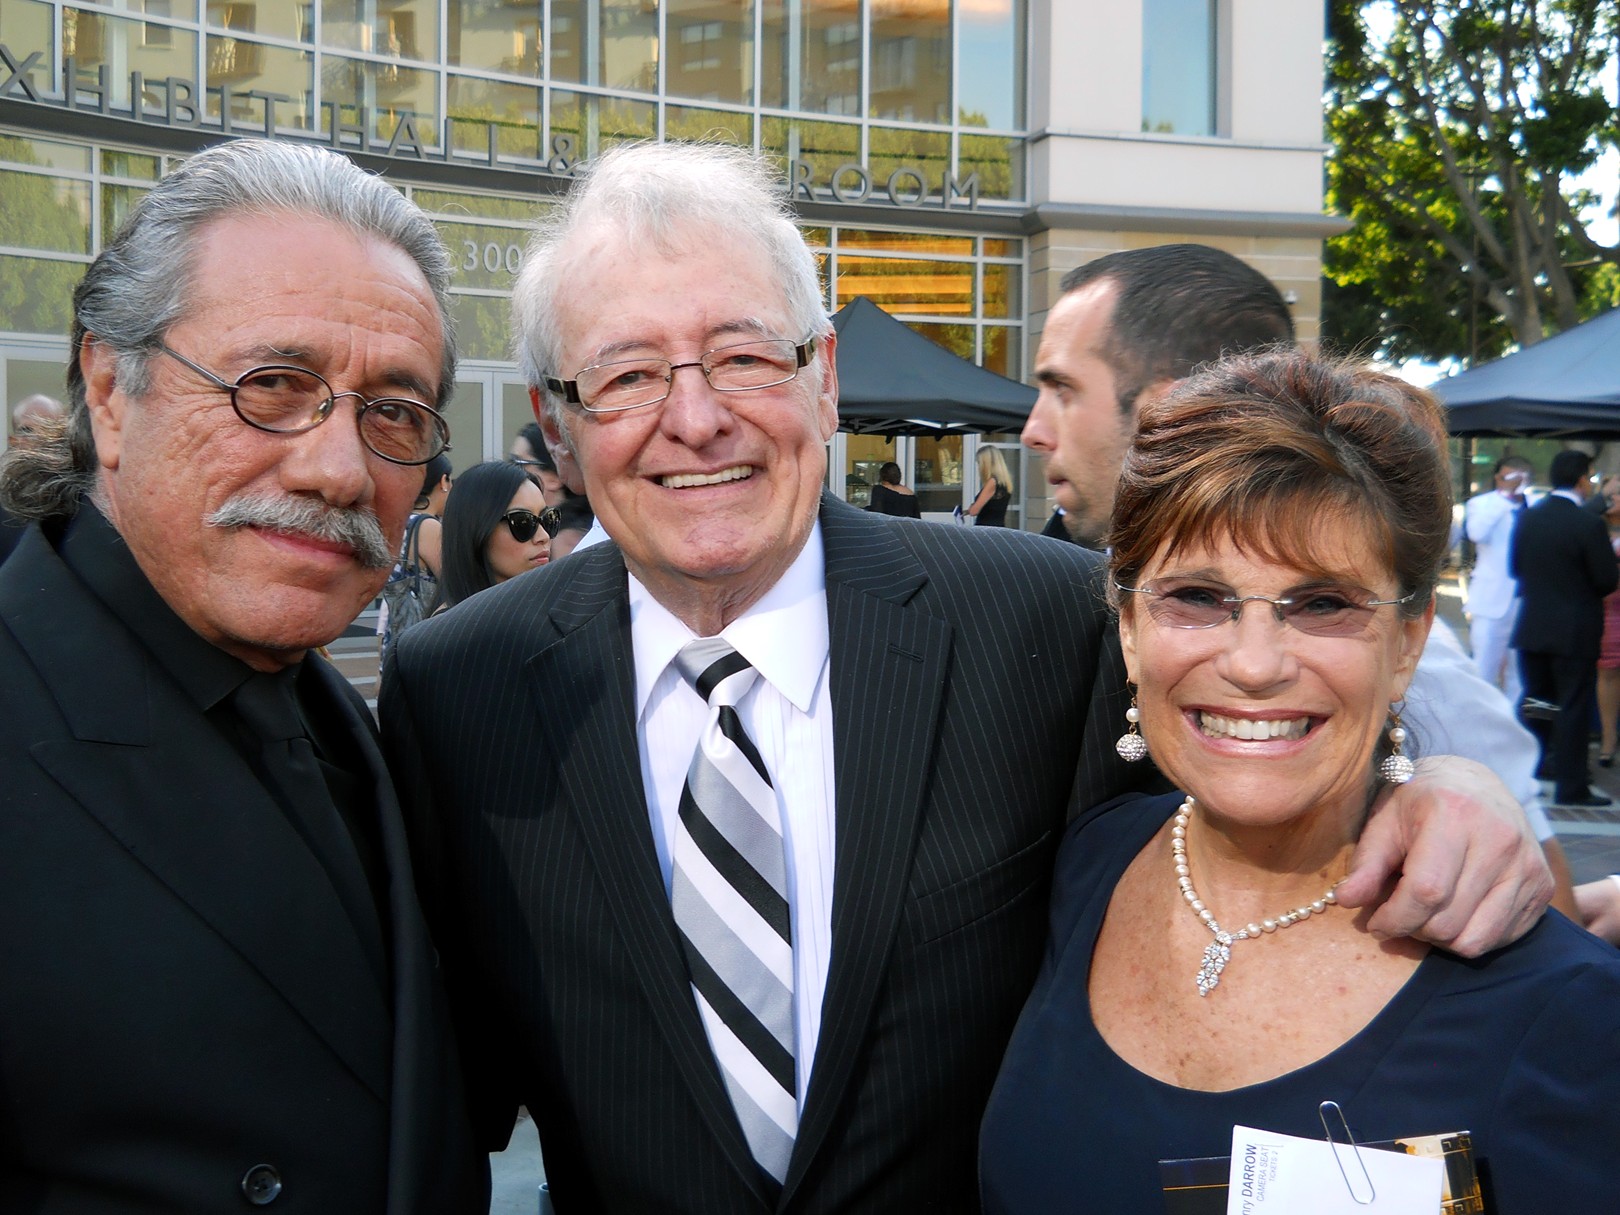 Edward James Olmos, Henry Darrow and Henry's wife Lauren Levian on the red carpet at the 2012 ALMA Awards